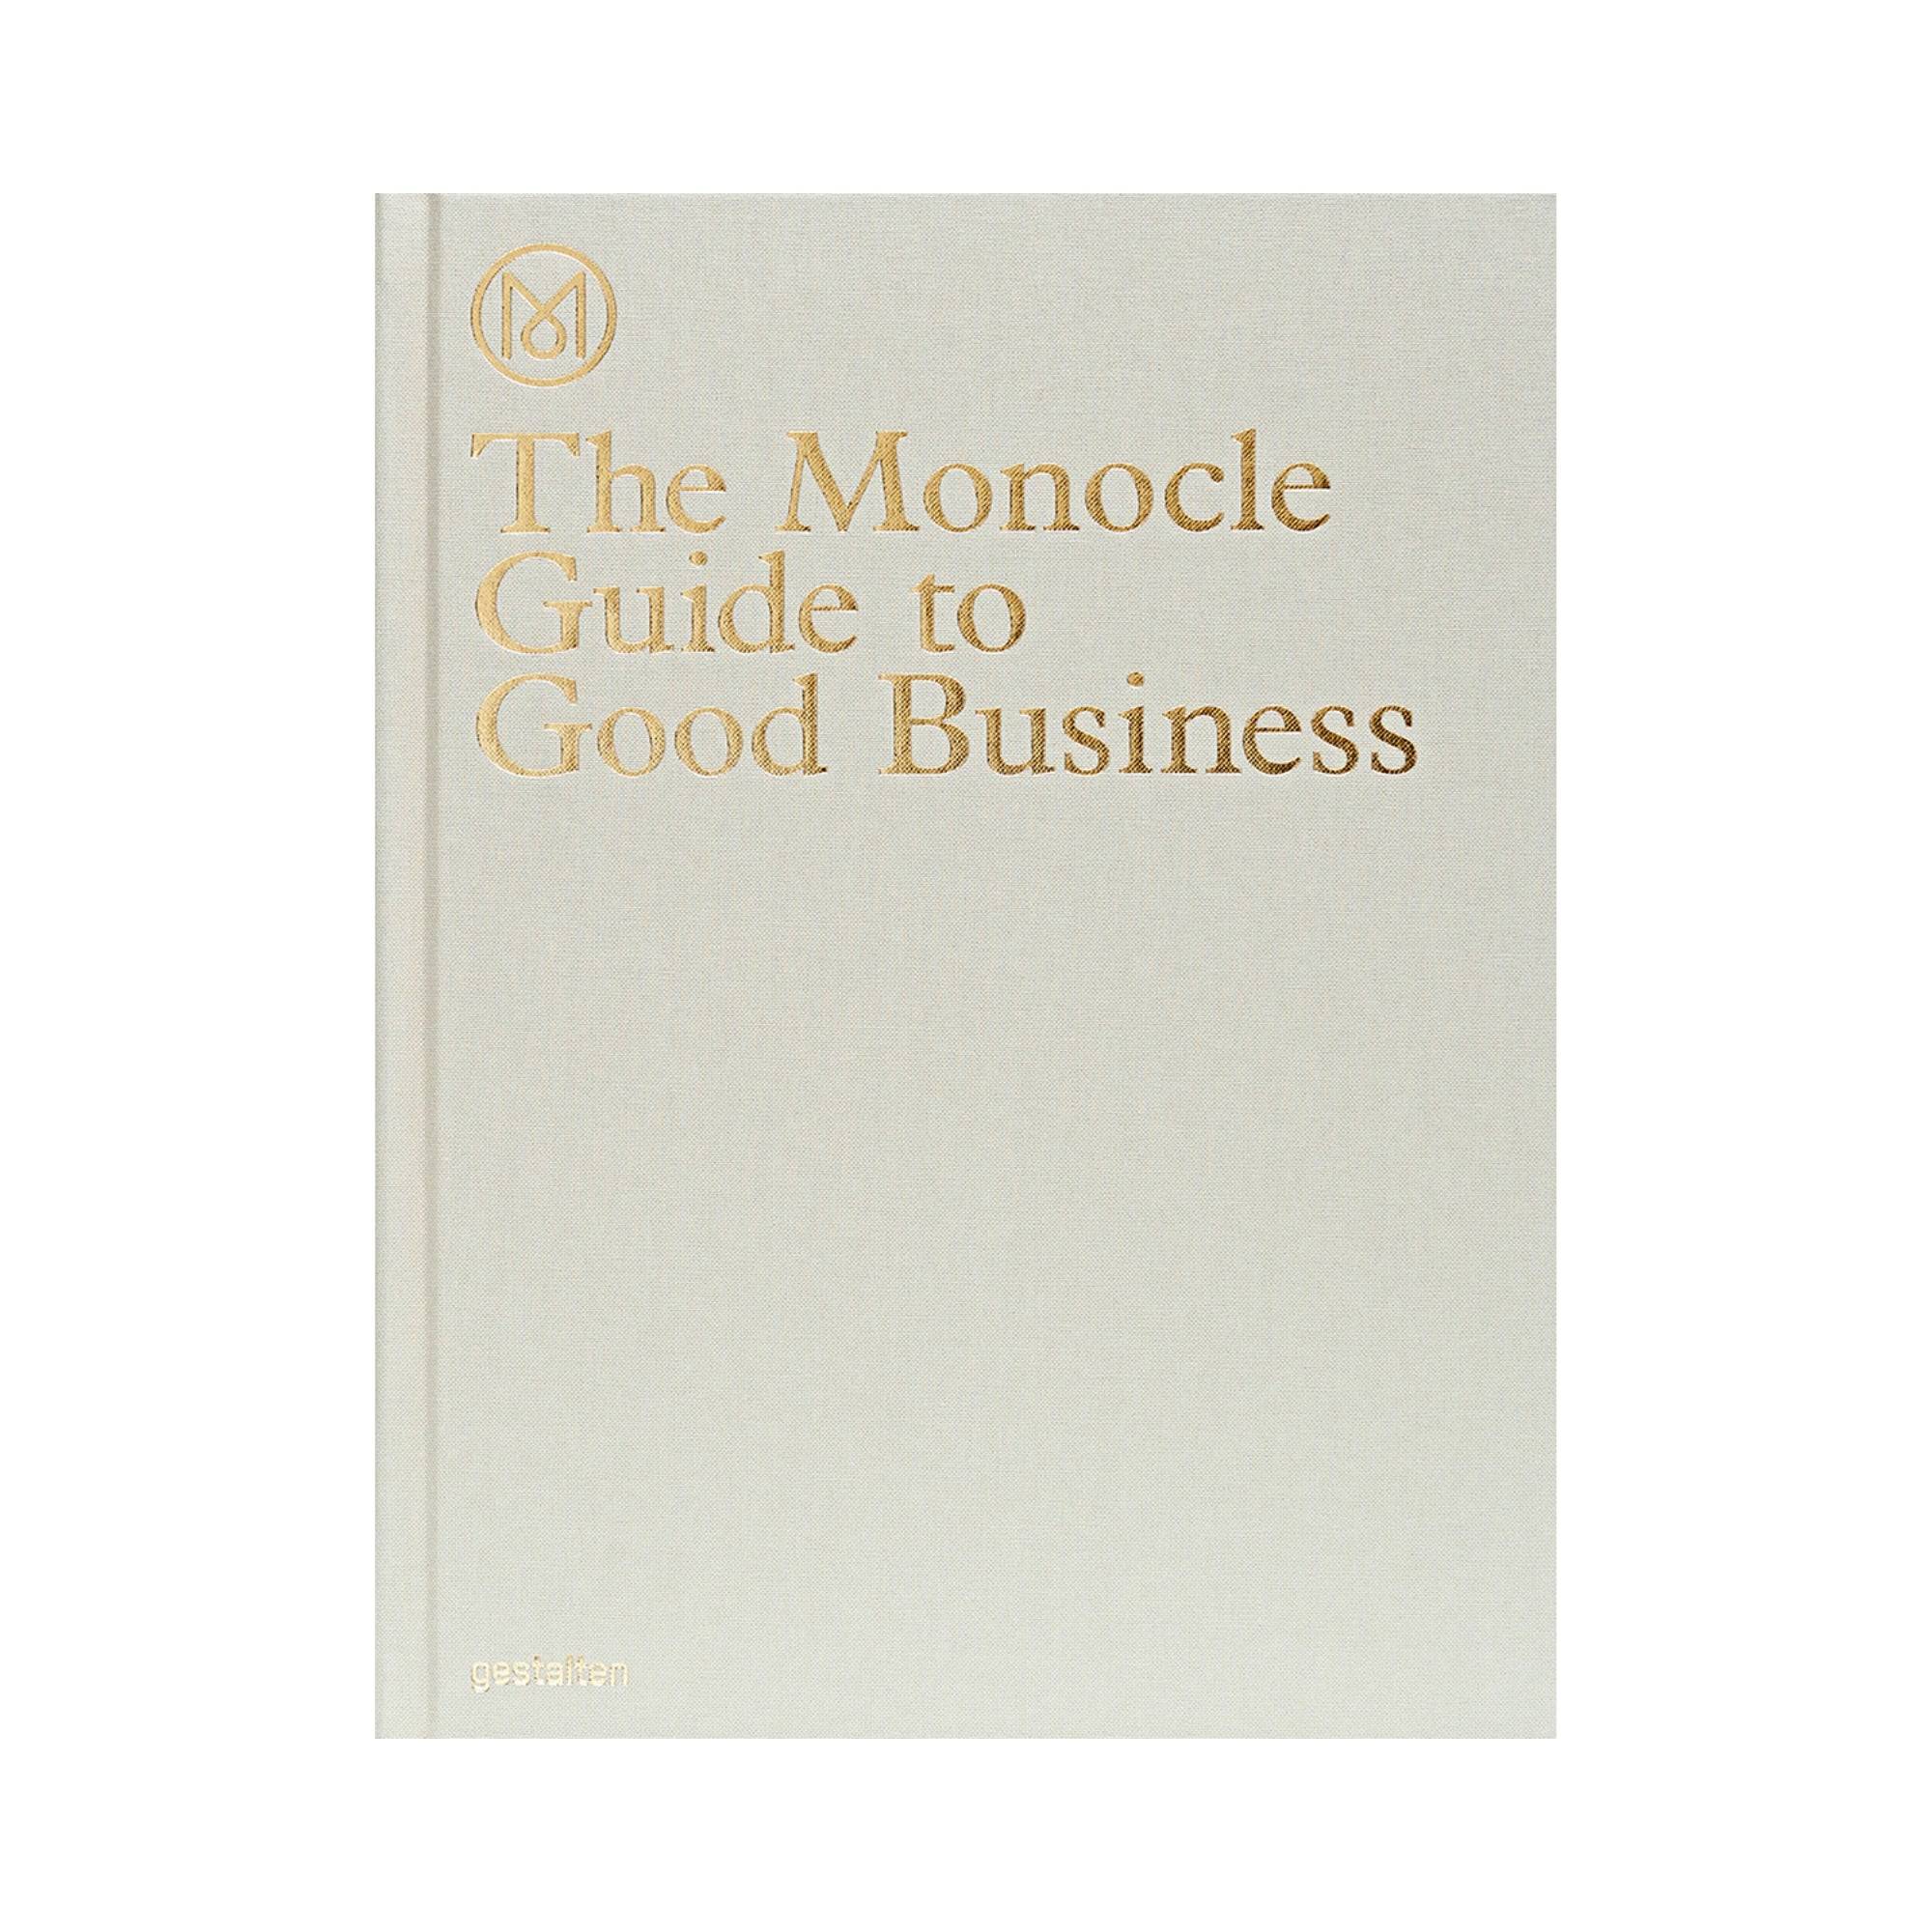 The Monocle Guide to Good Business - THAT COOL LIVING